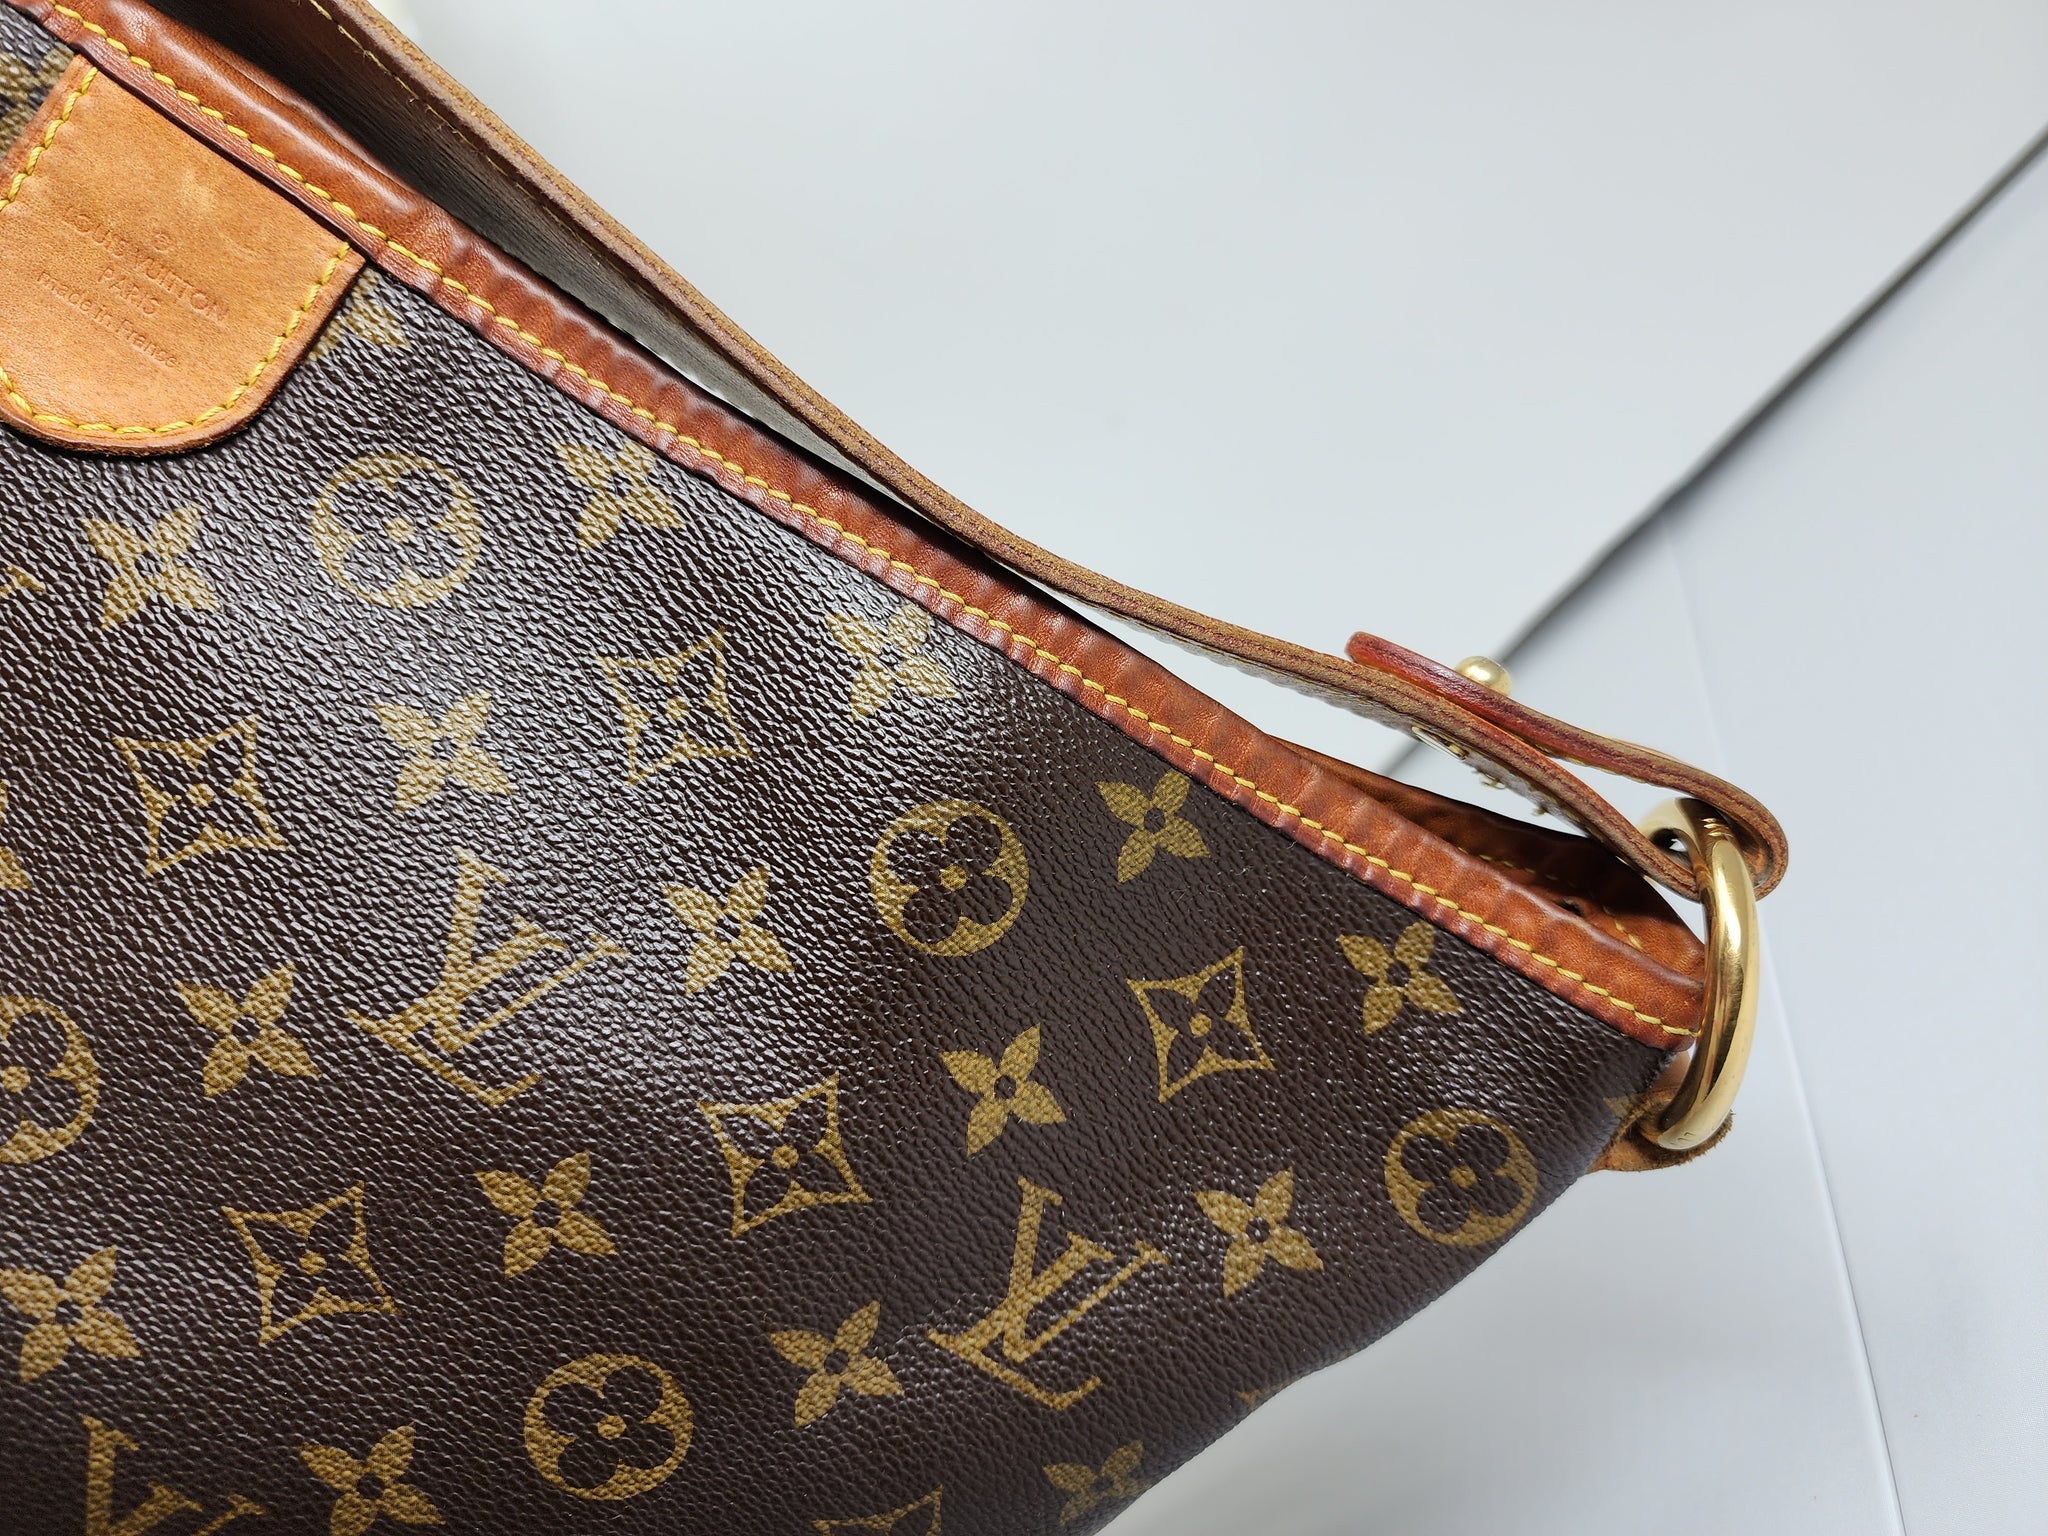 Auth Louis Vuitton Delightful MM Monogram M40353 Opening Leather Damaged  ALA561